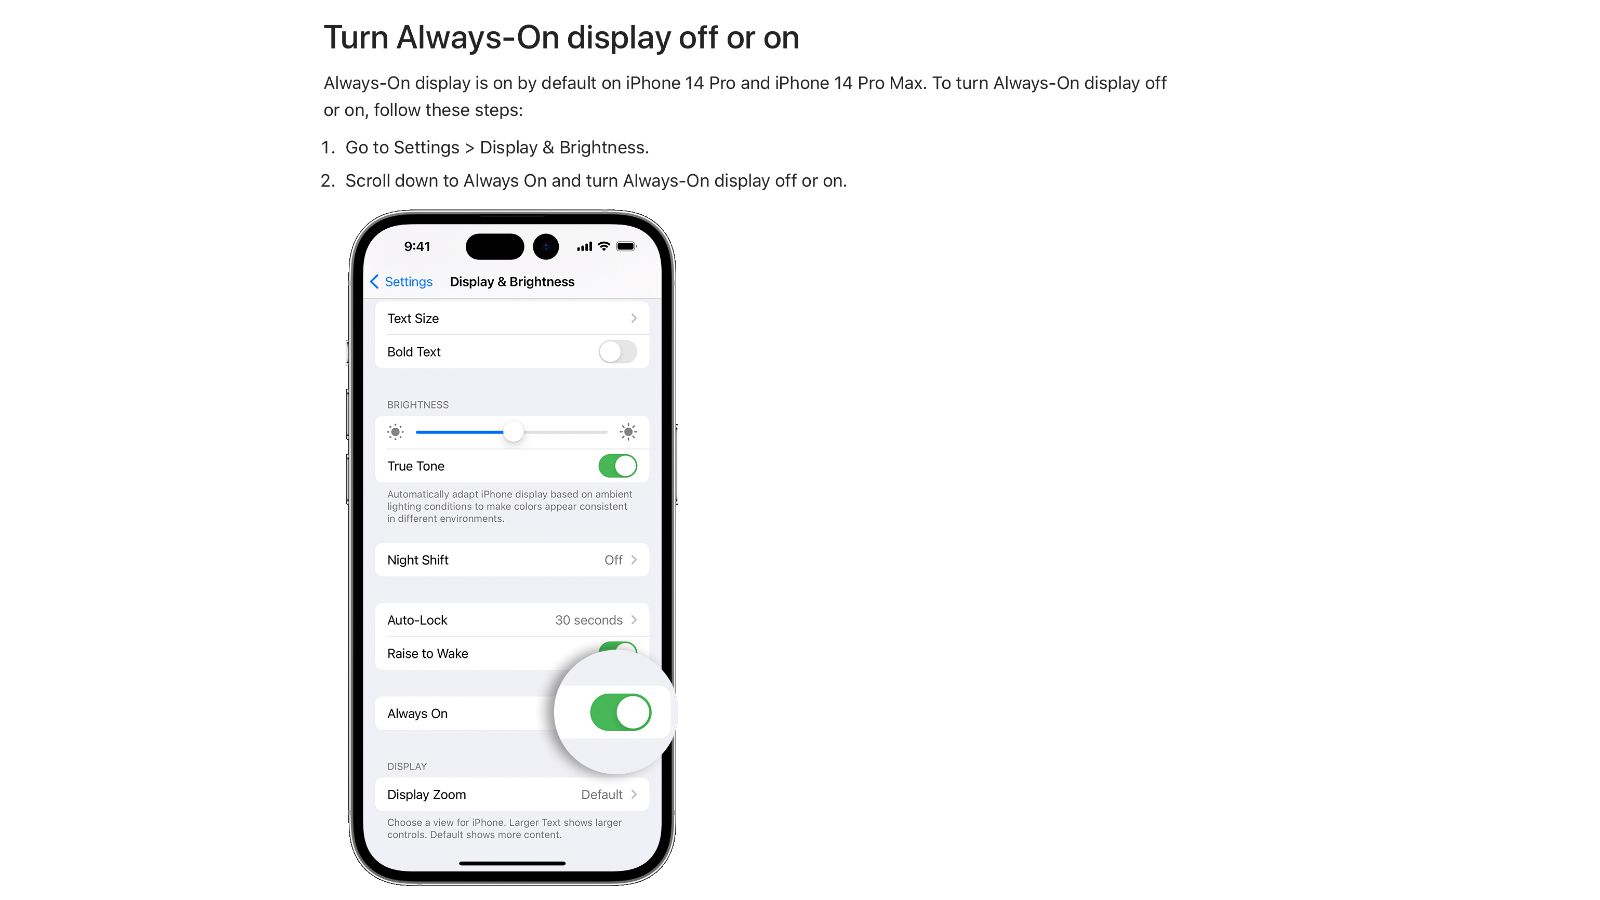 Displays - Official Apple Support